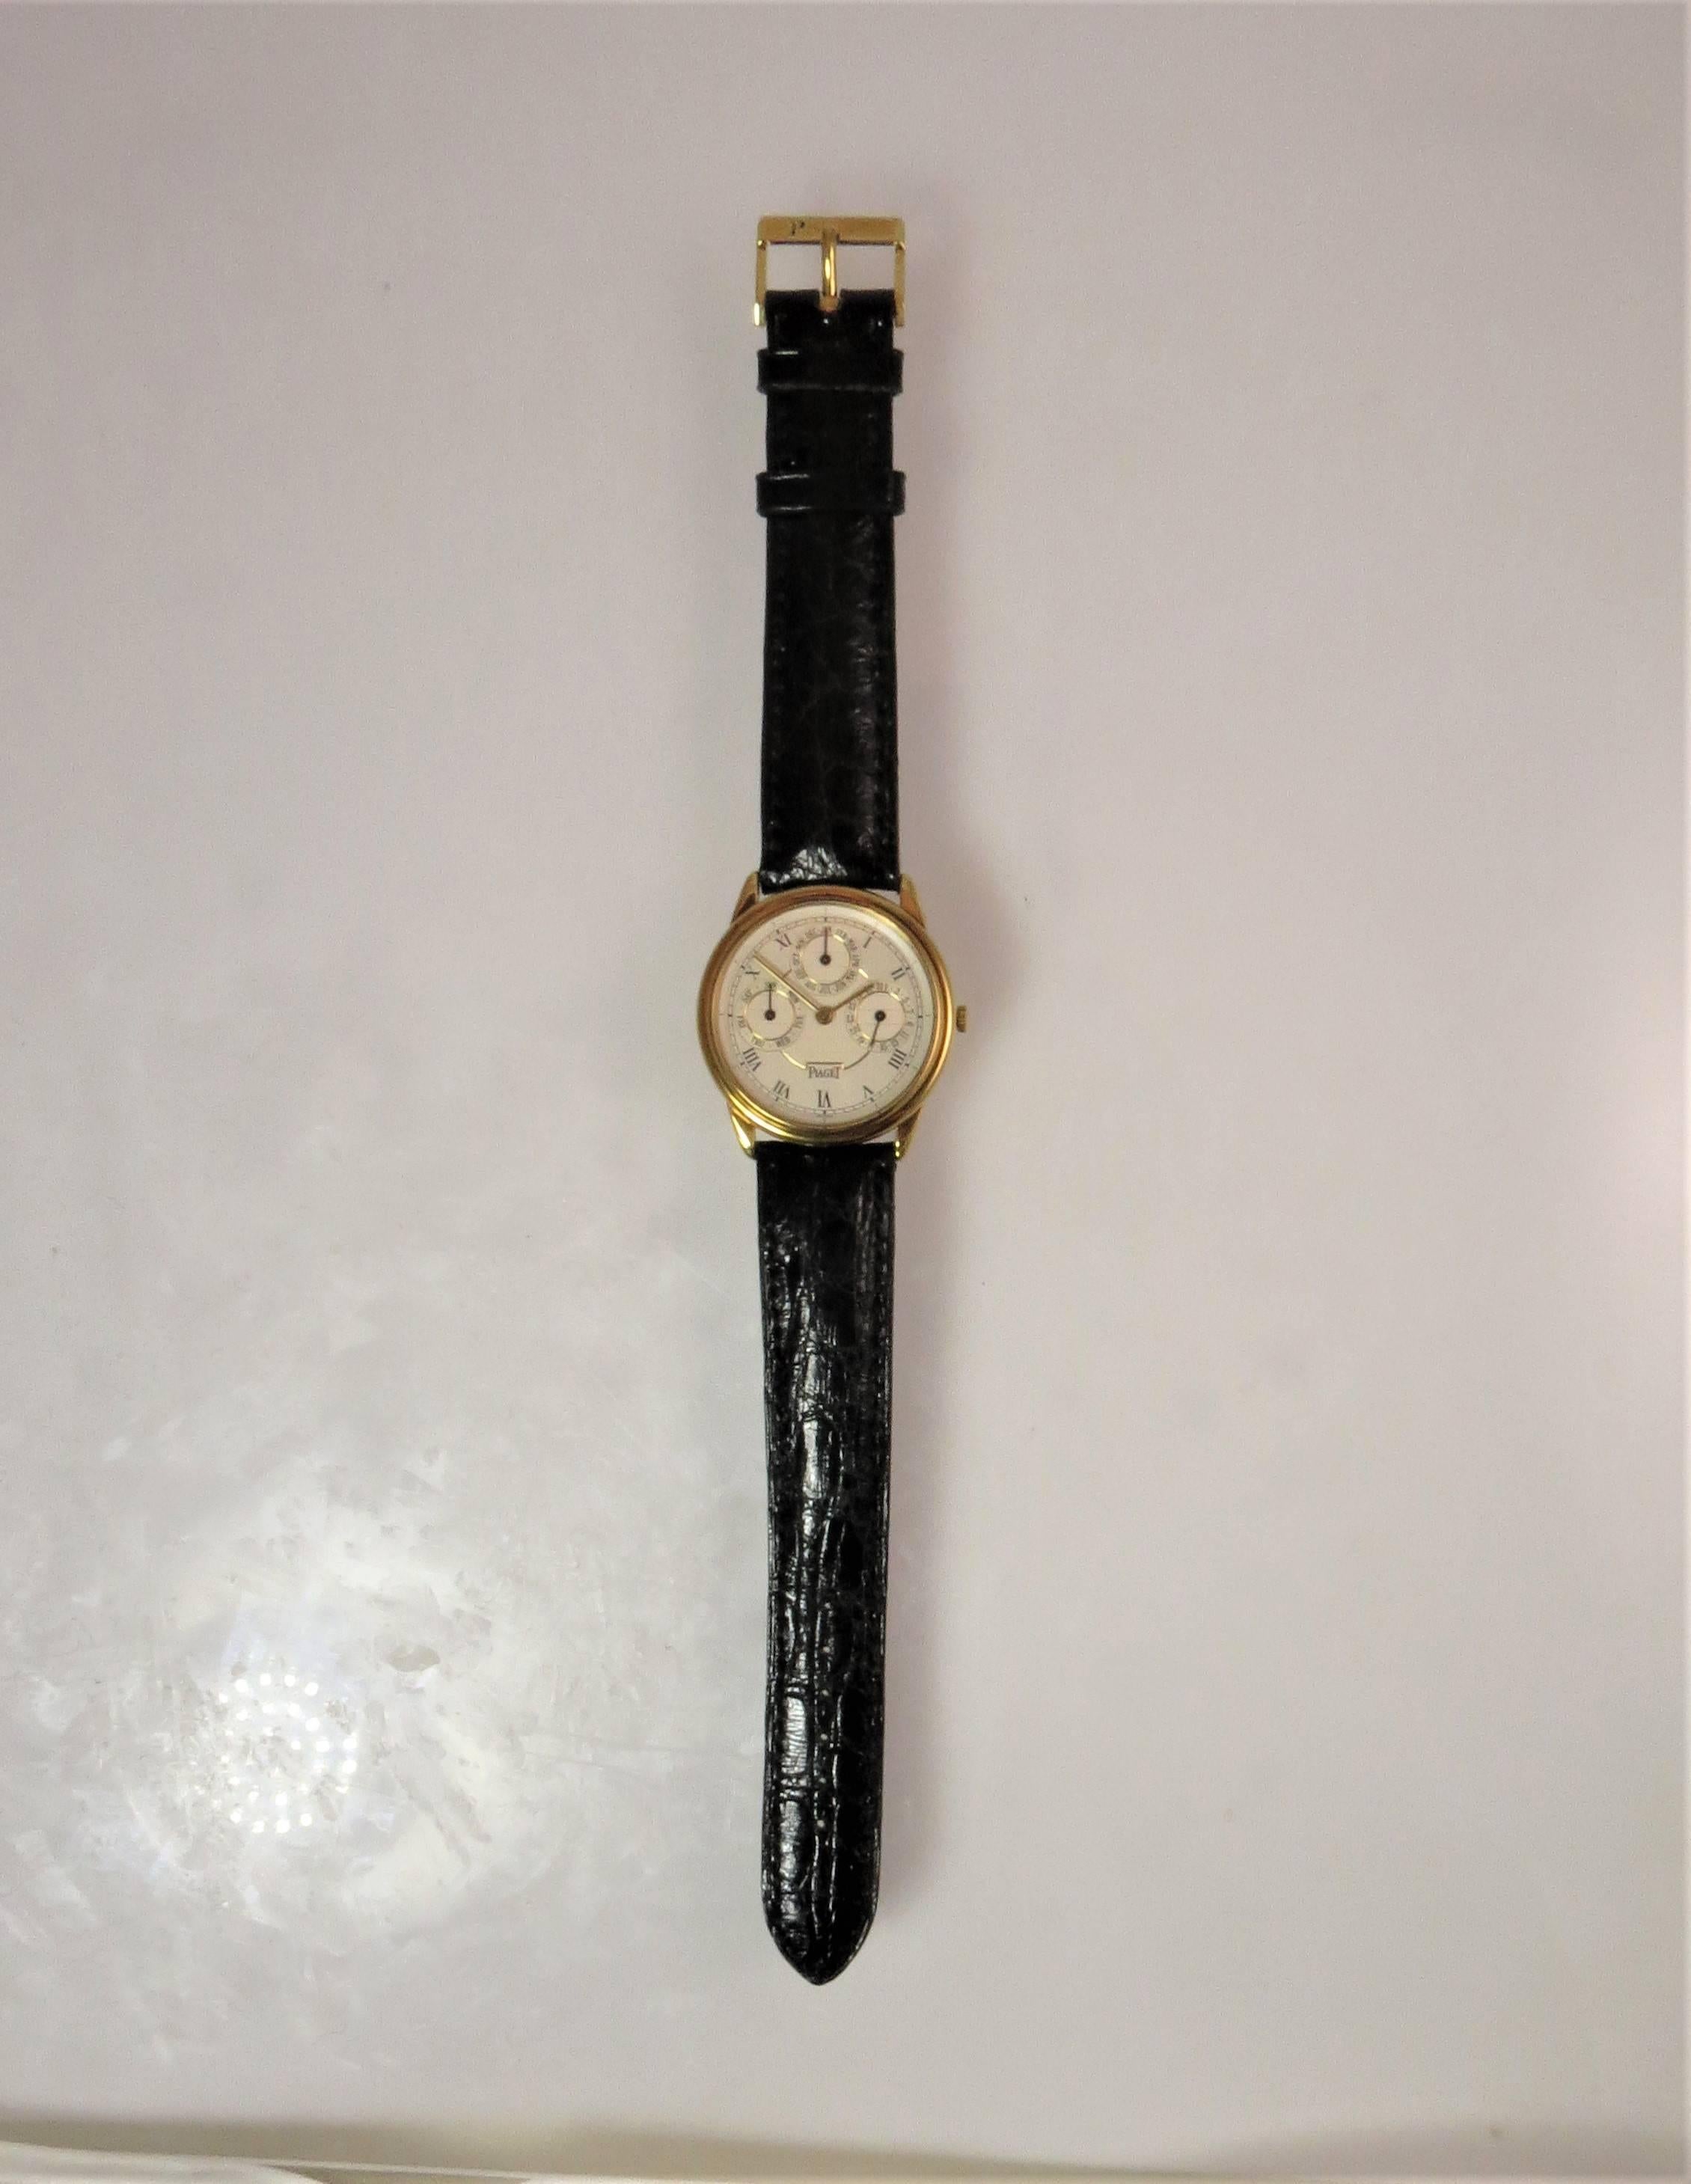 Brand new, never worn, 18K yellow gold Piaget Automatic strap watch, silver textured dial, automatic movement, case size 31mm, three subdials showing month, date and day, 18k yellow gold Piaget buckle, model 15959Y, serial #553737.
Last retail